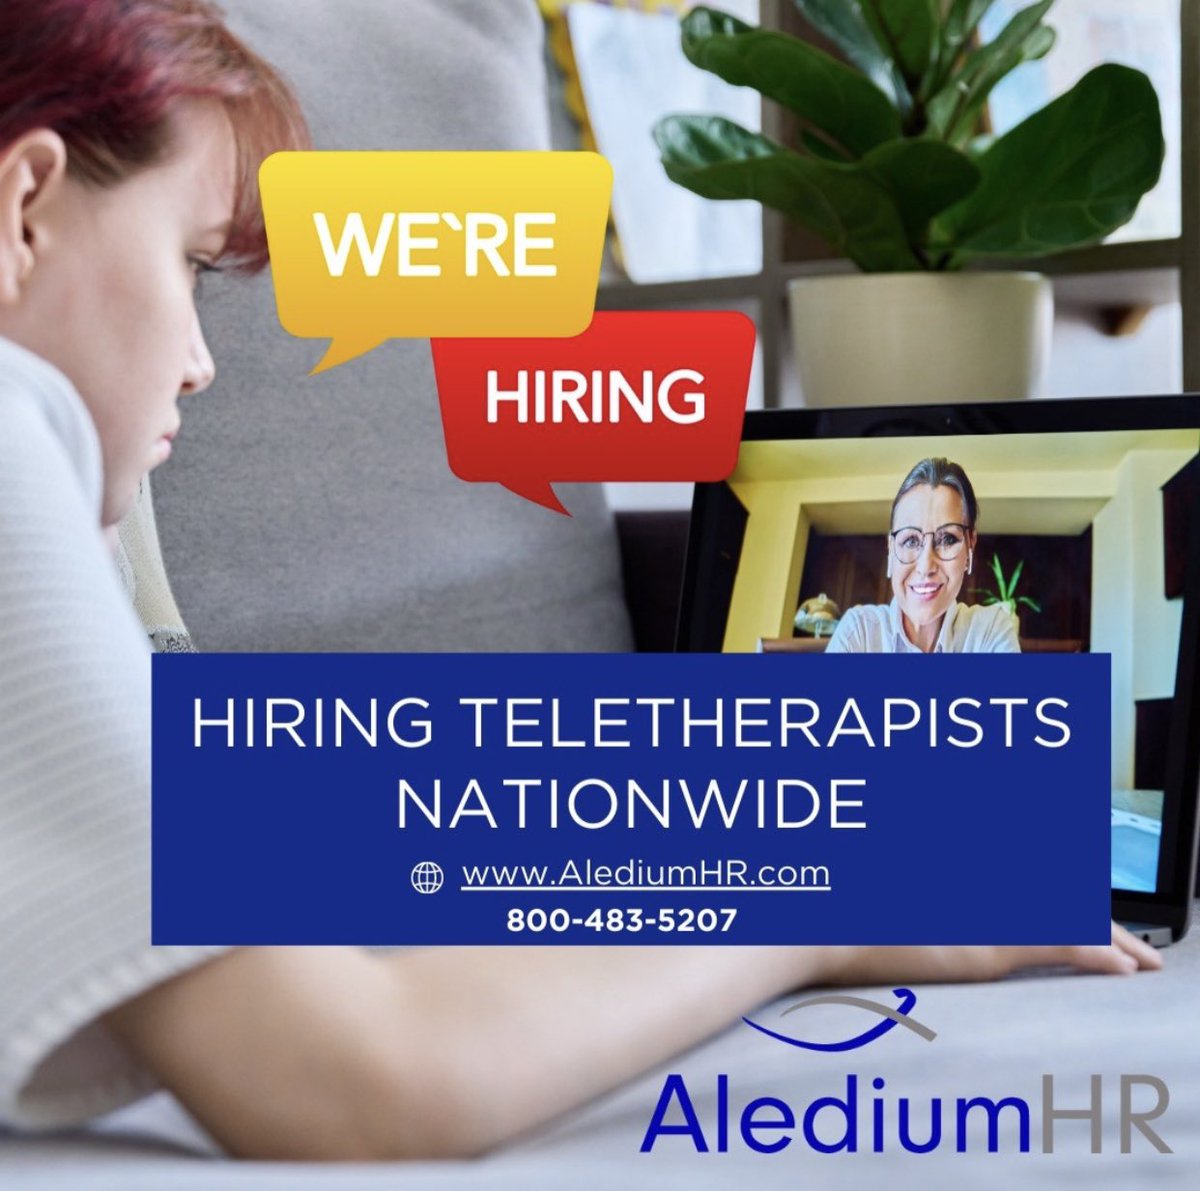 @AlinaTelehealth Let us know if we can help. One of our specialties is remote therapist recruiting. We are also recognized as the leading Telehealth direct hire firm since 2013. We offer a 12 month placement guarantee.